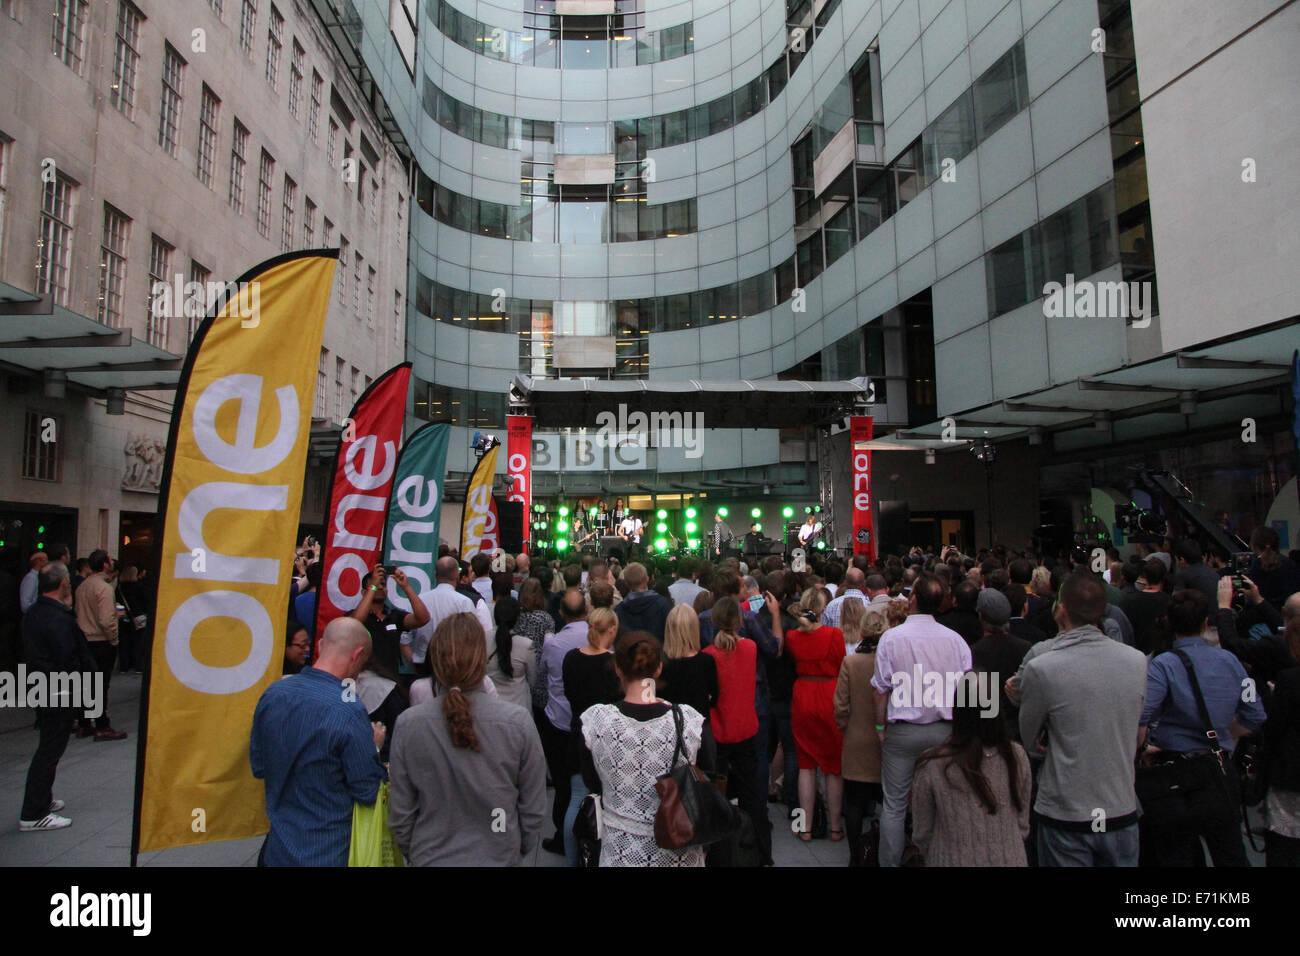 London, UK. 3rd Sep, 2014. Kasabian performing outside the BBC studios for the One Show in London, UK, © SimonJames/WFPA/Alamy L Stock Photo